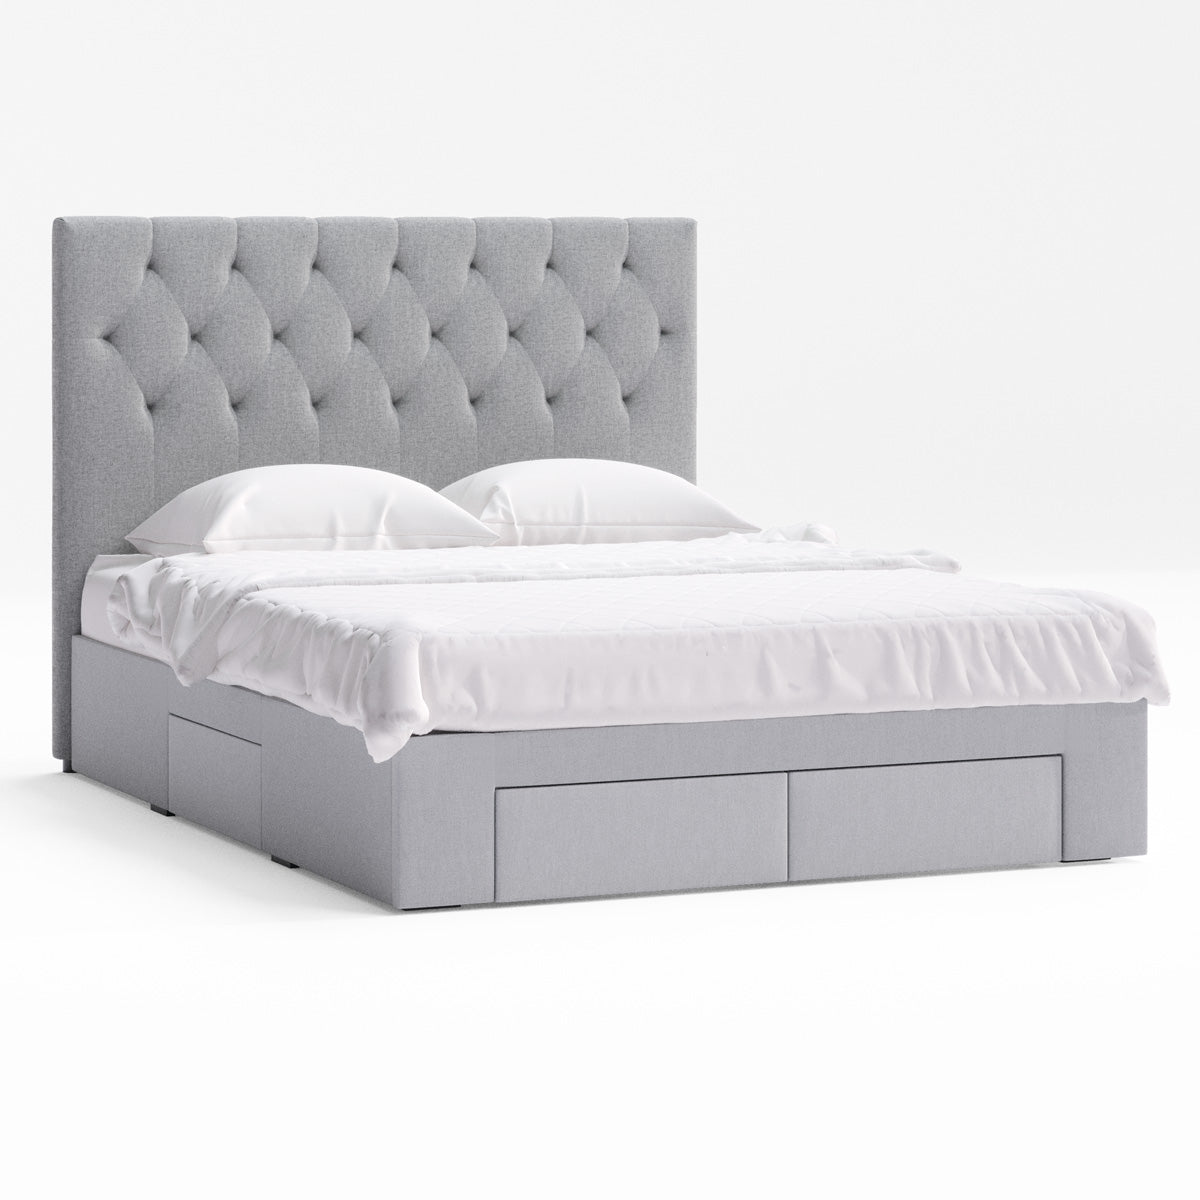 Fenwick Bed Frame with Four Storage Drawers (Grey Fabric)